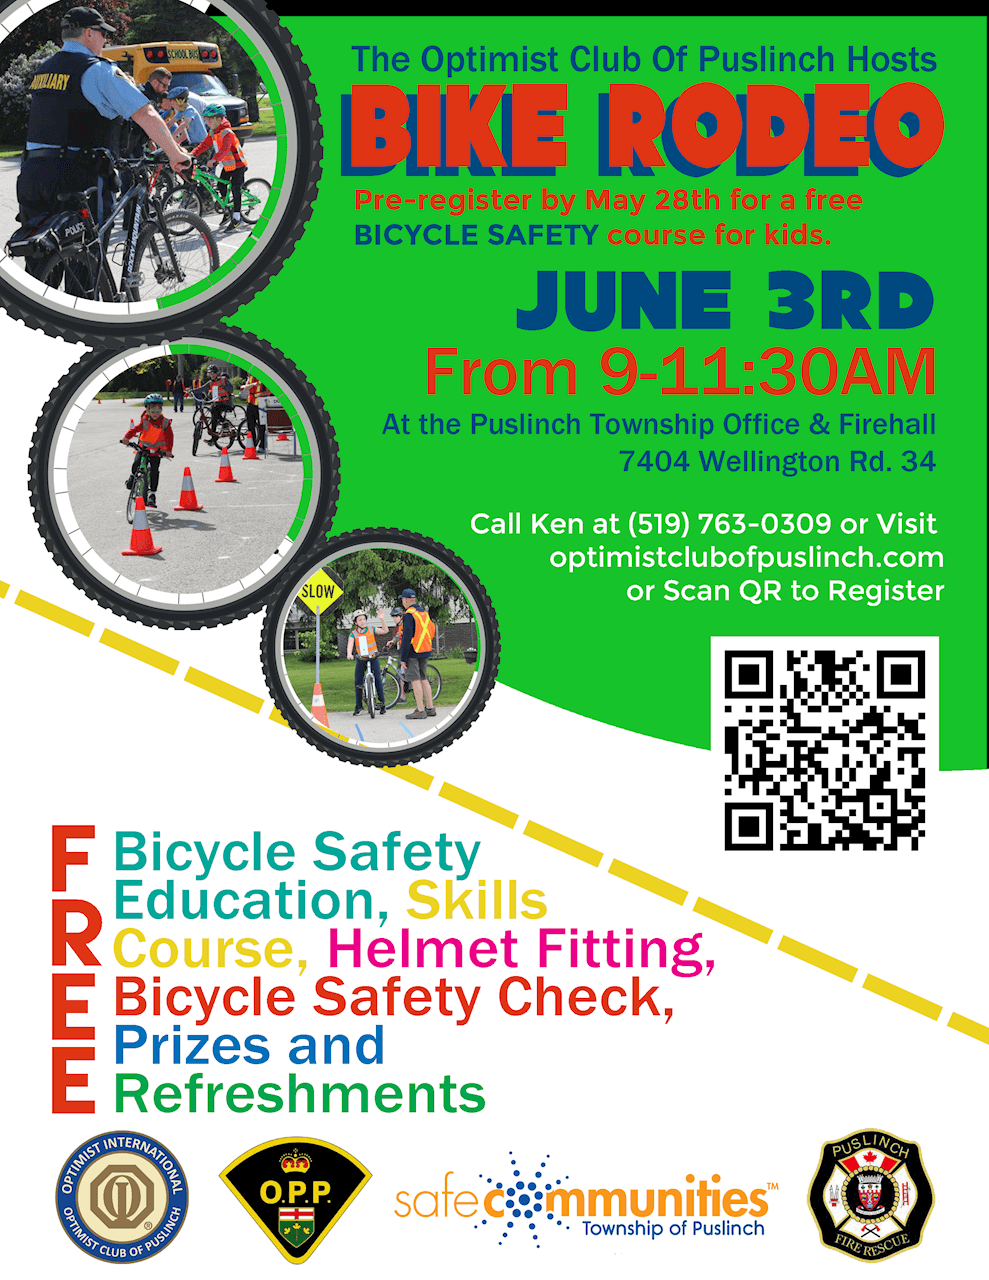 Optimist Club Bike Rodeo On May 28th - Puslinch Today